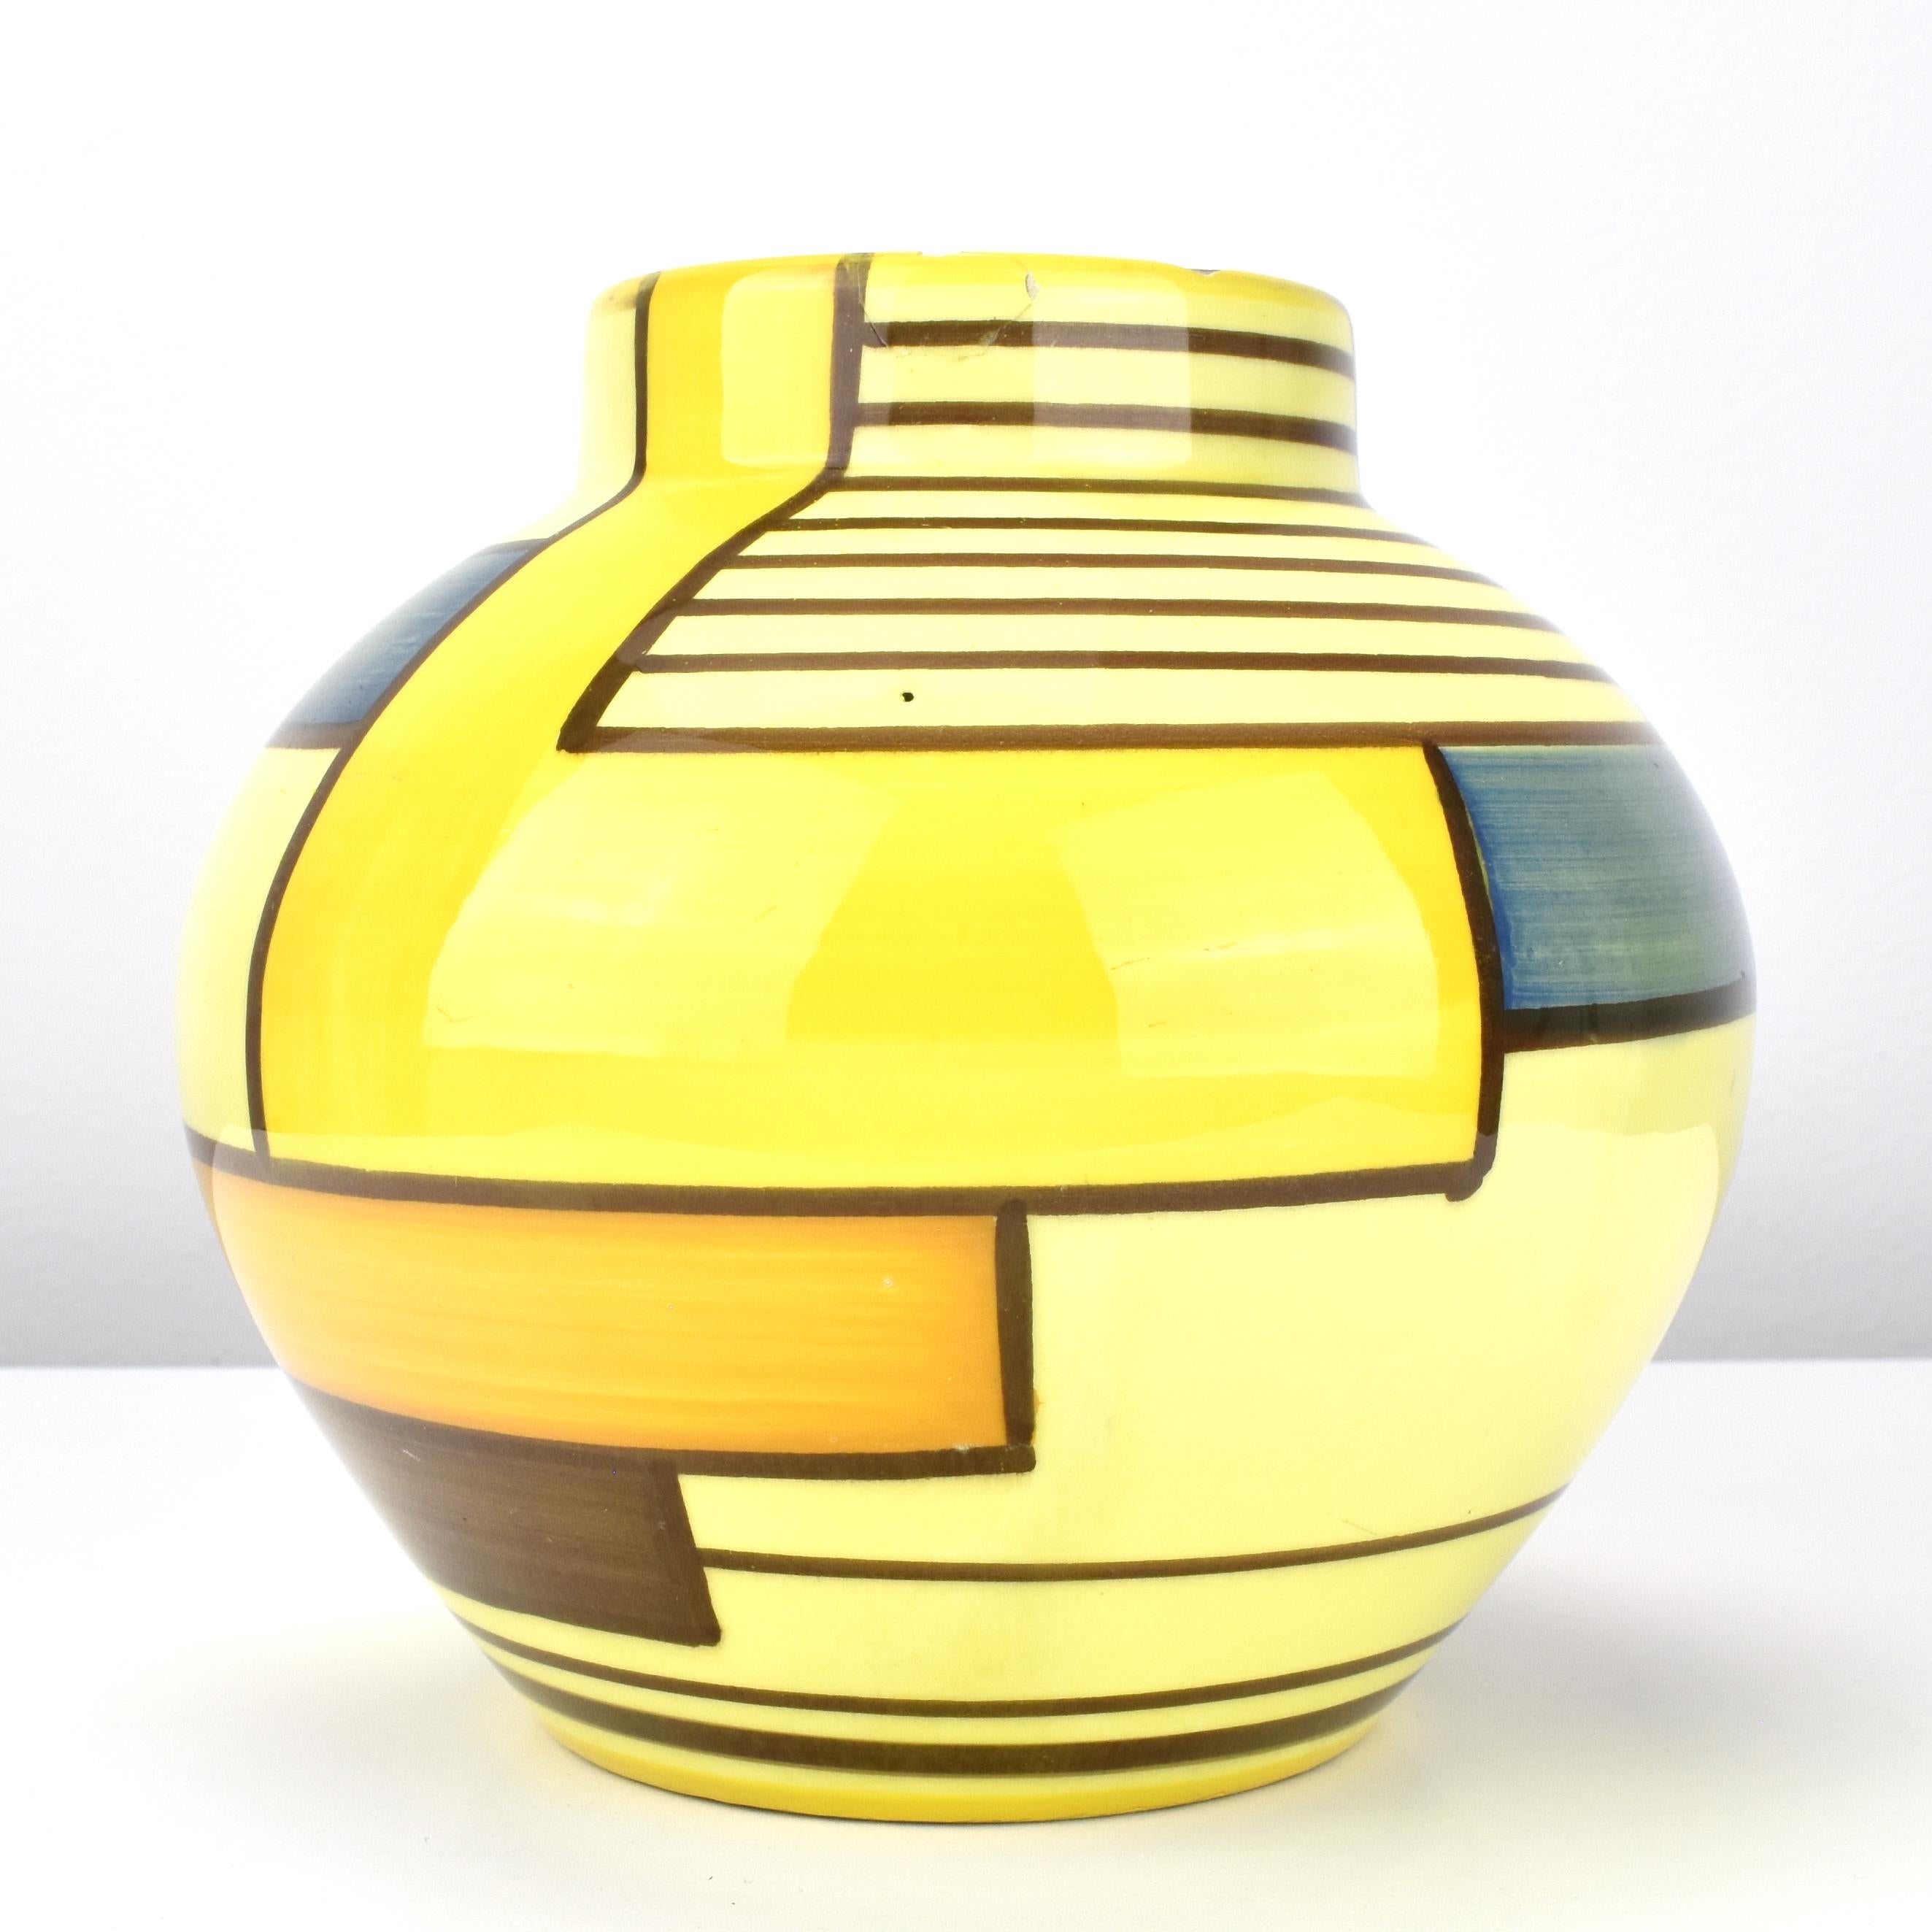 This Schramberg Eva Zeisel Mondrian pattern Art Deco Bauhaus vase is a rare and highly collectible piece of ceramic art. This vase was created in the early 20th Century during the Art Deco period, which was characterized by bold geometric shapes,